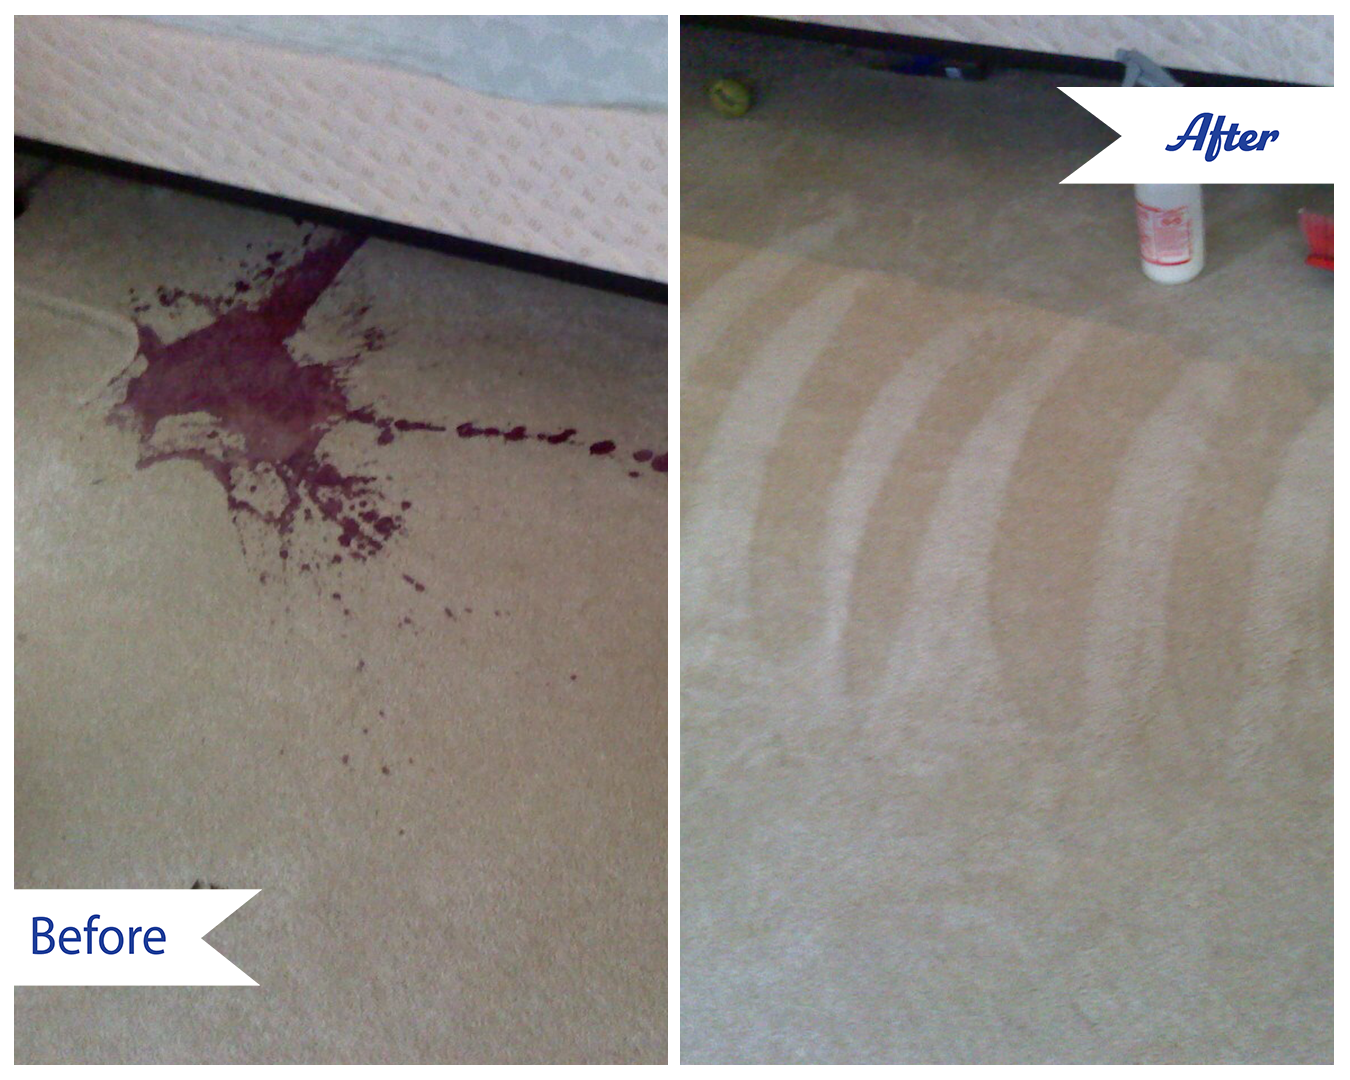 Before and after carpet cleaning in Simi Valley, Ca